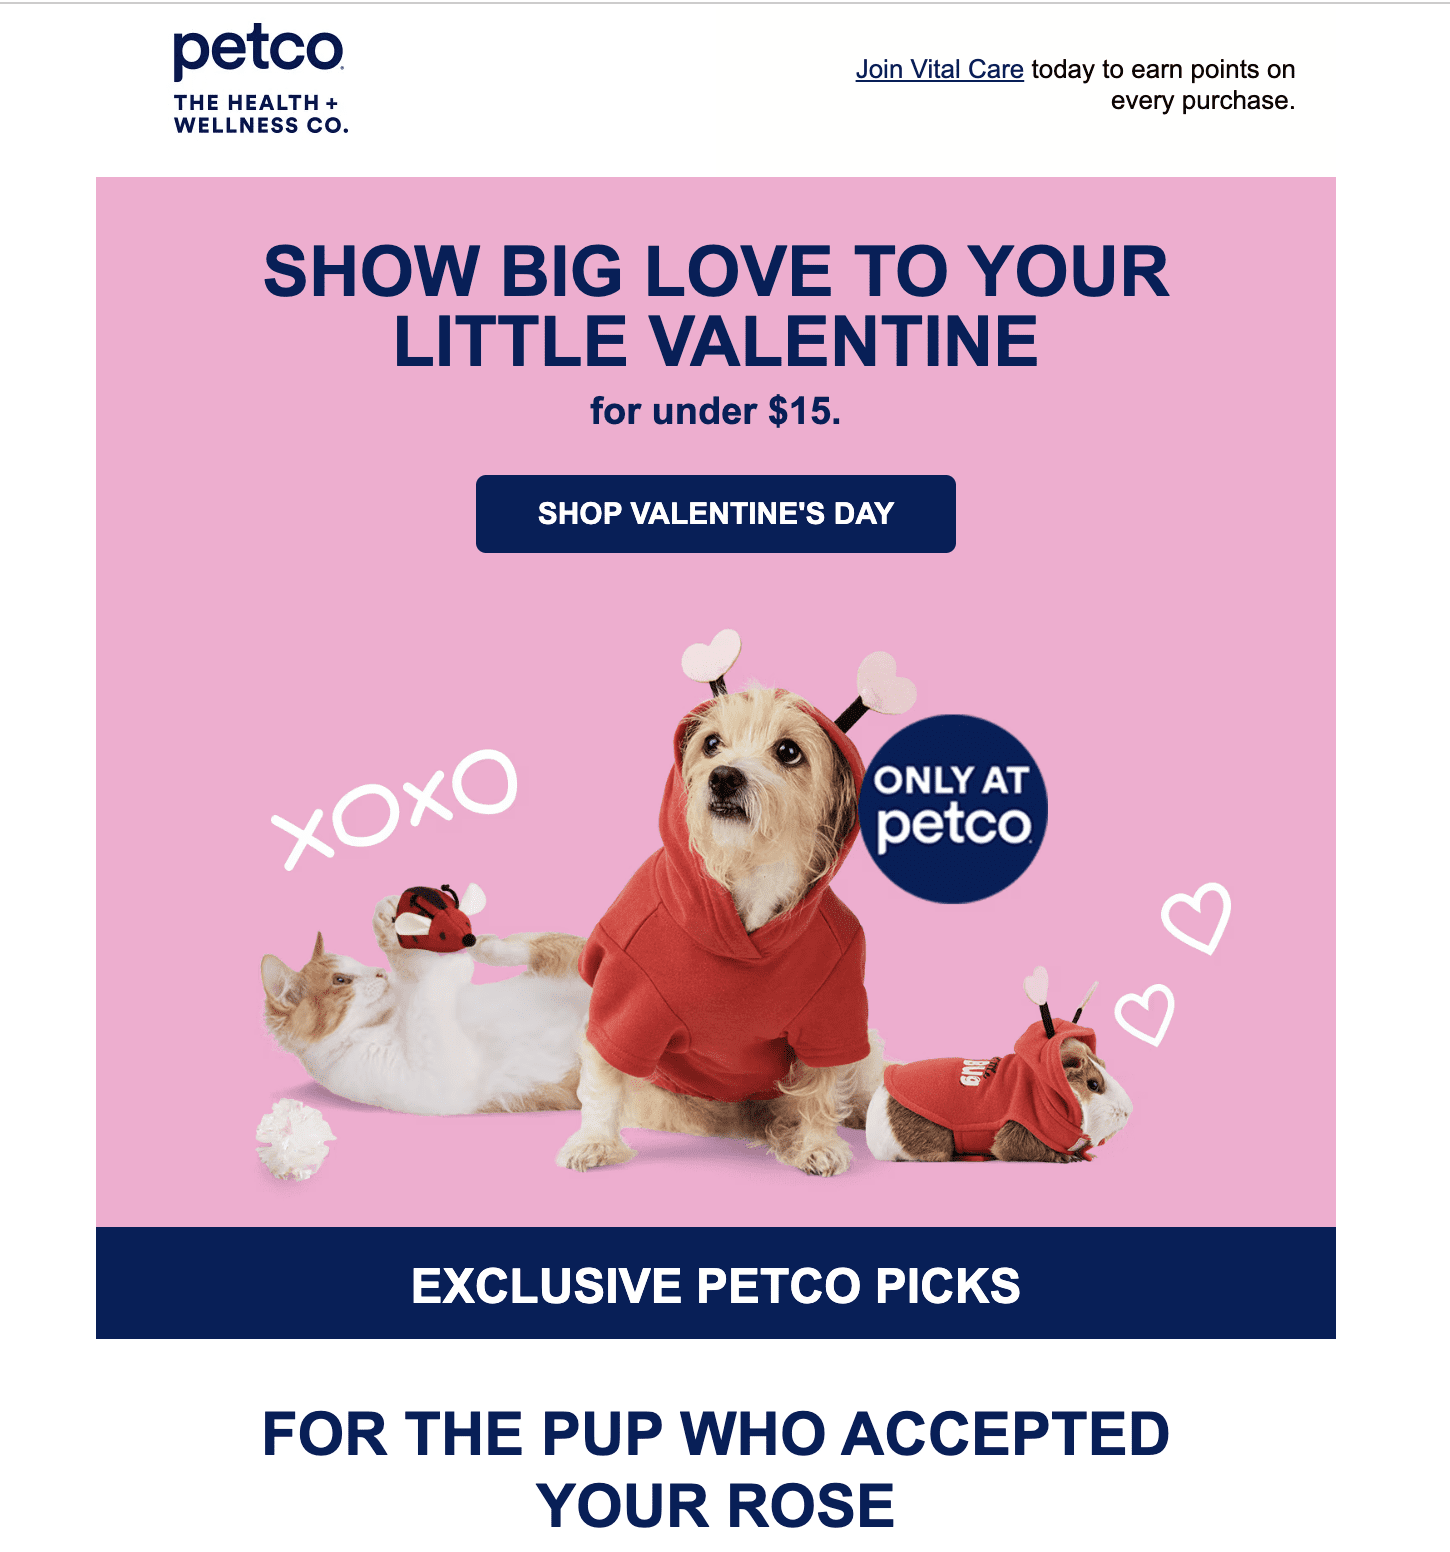 Email campaign before Saint Valentine’s Day with catchy subject line